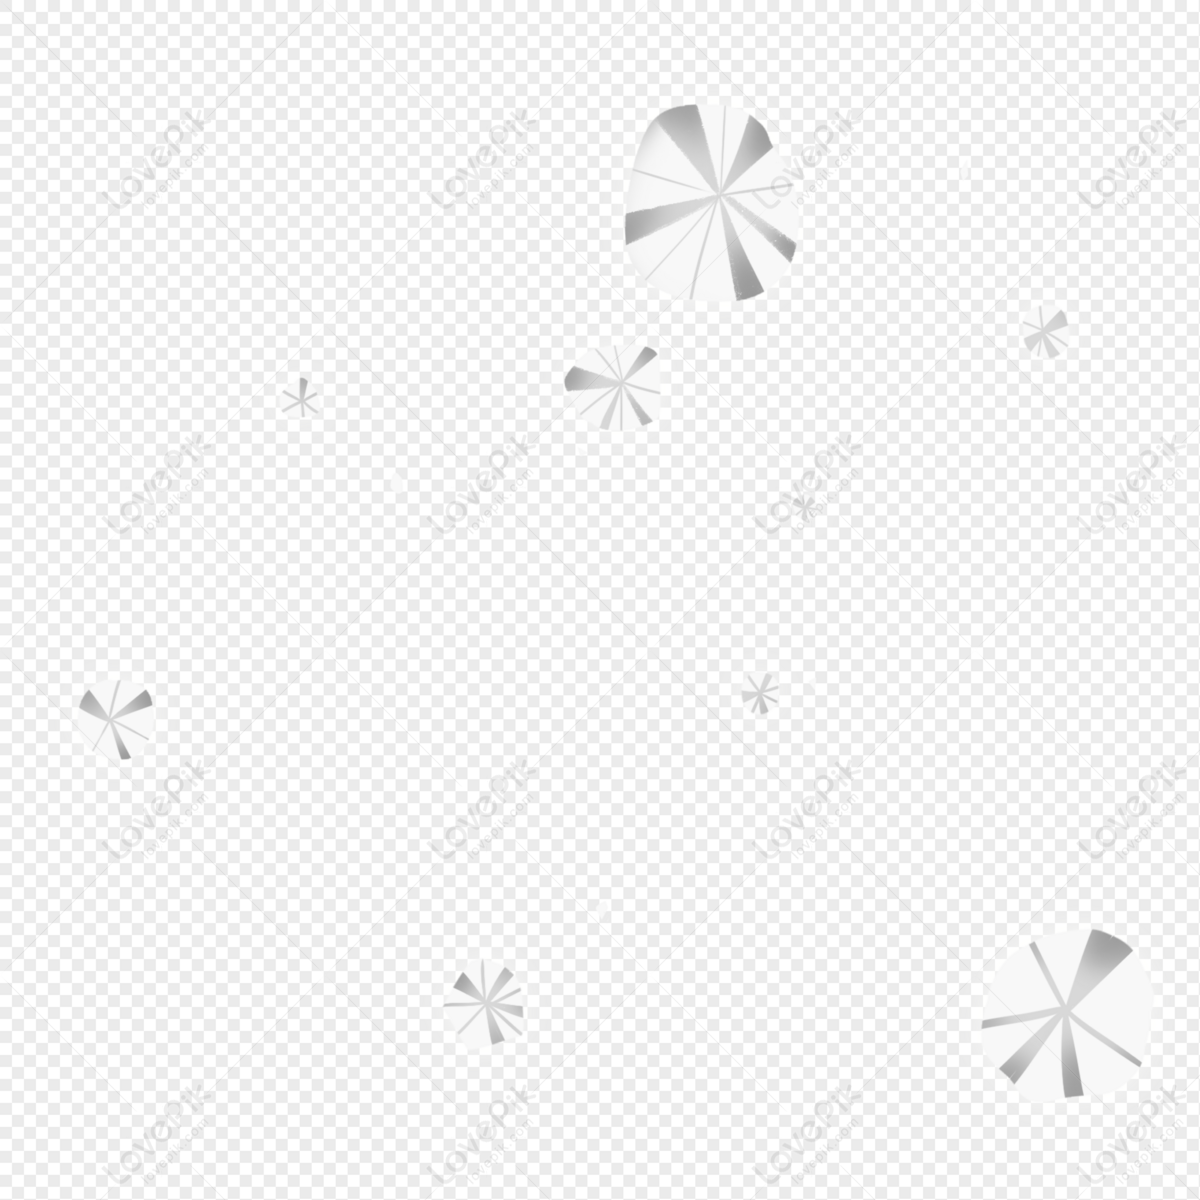 Diamond Crystal Ray PNG Transparent Background And Clipart Image For Free  Download - Lovepik | 401459570